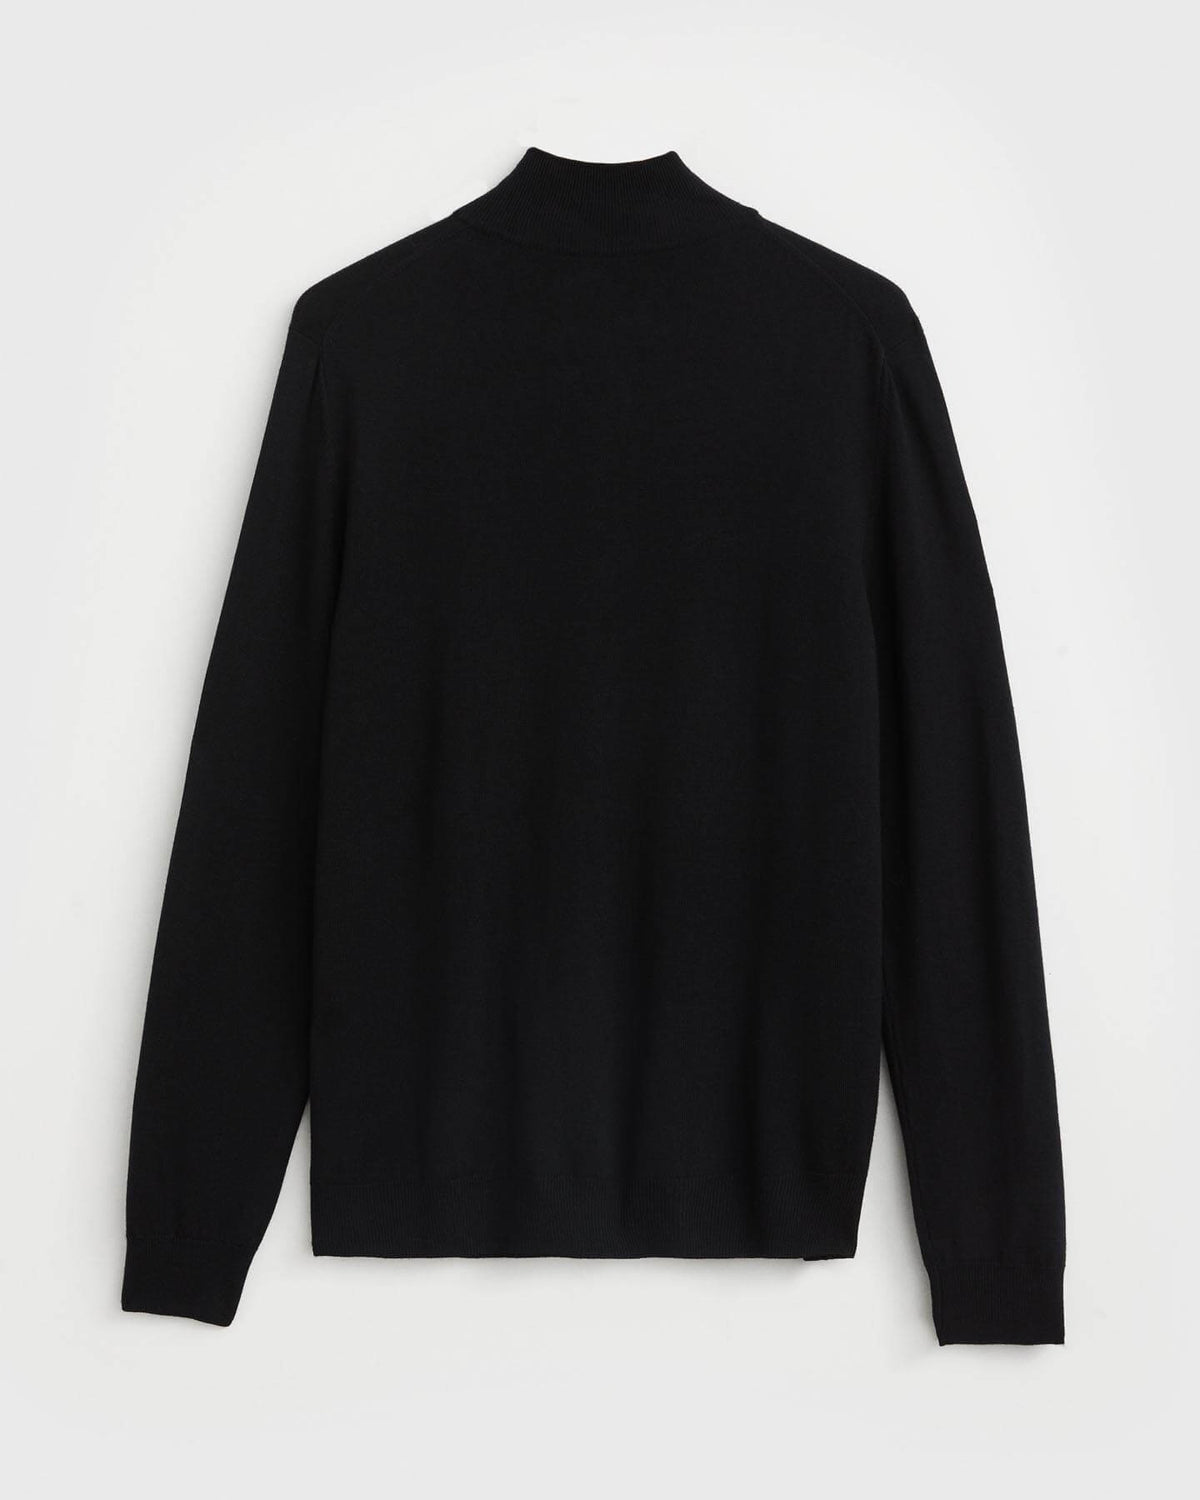 Trento Wool and Cashmere Unisex Half-Zip Pullover Sweater